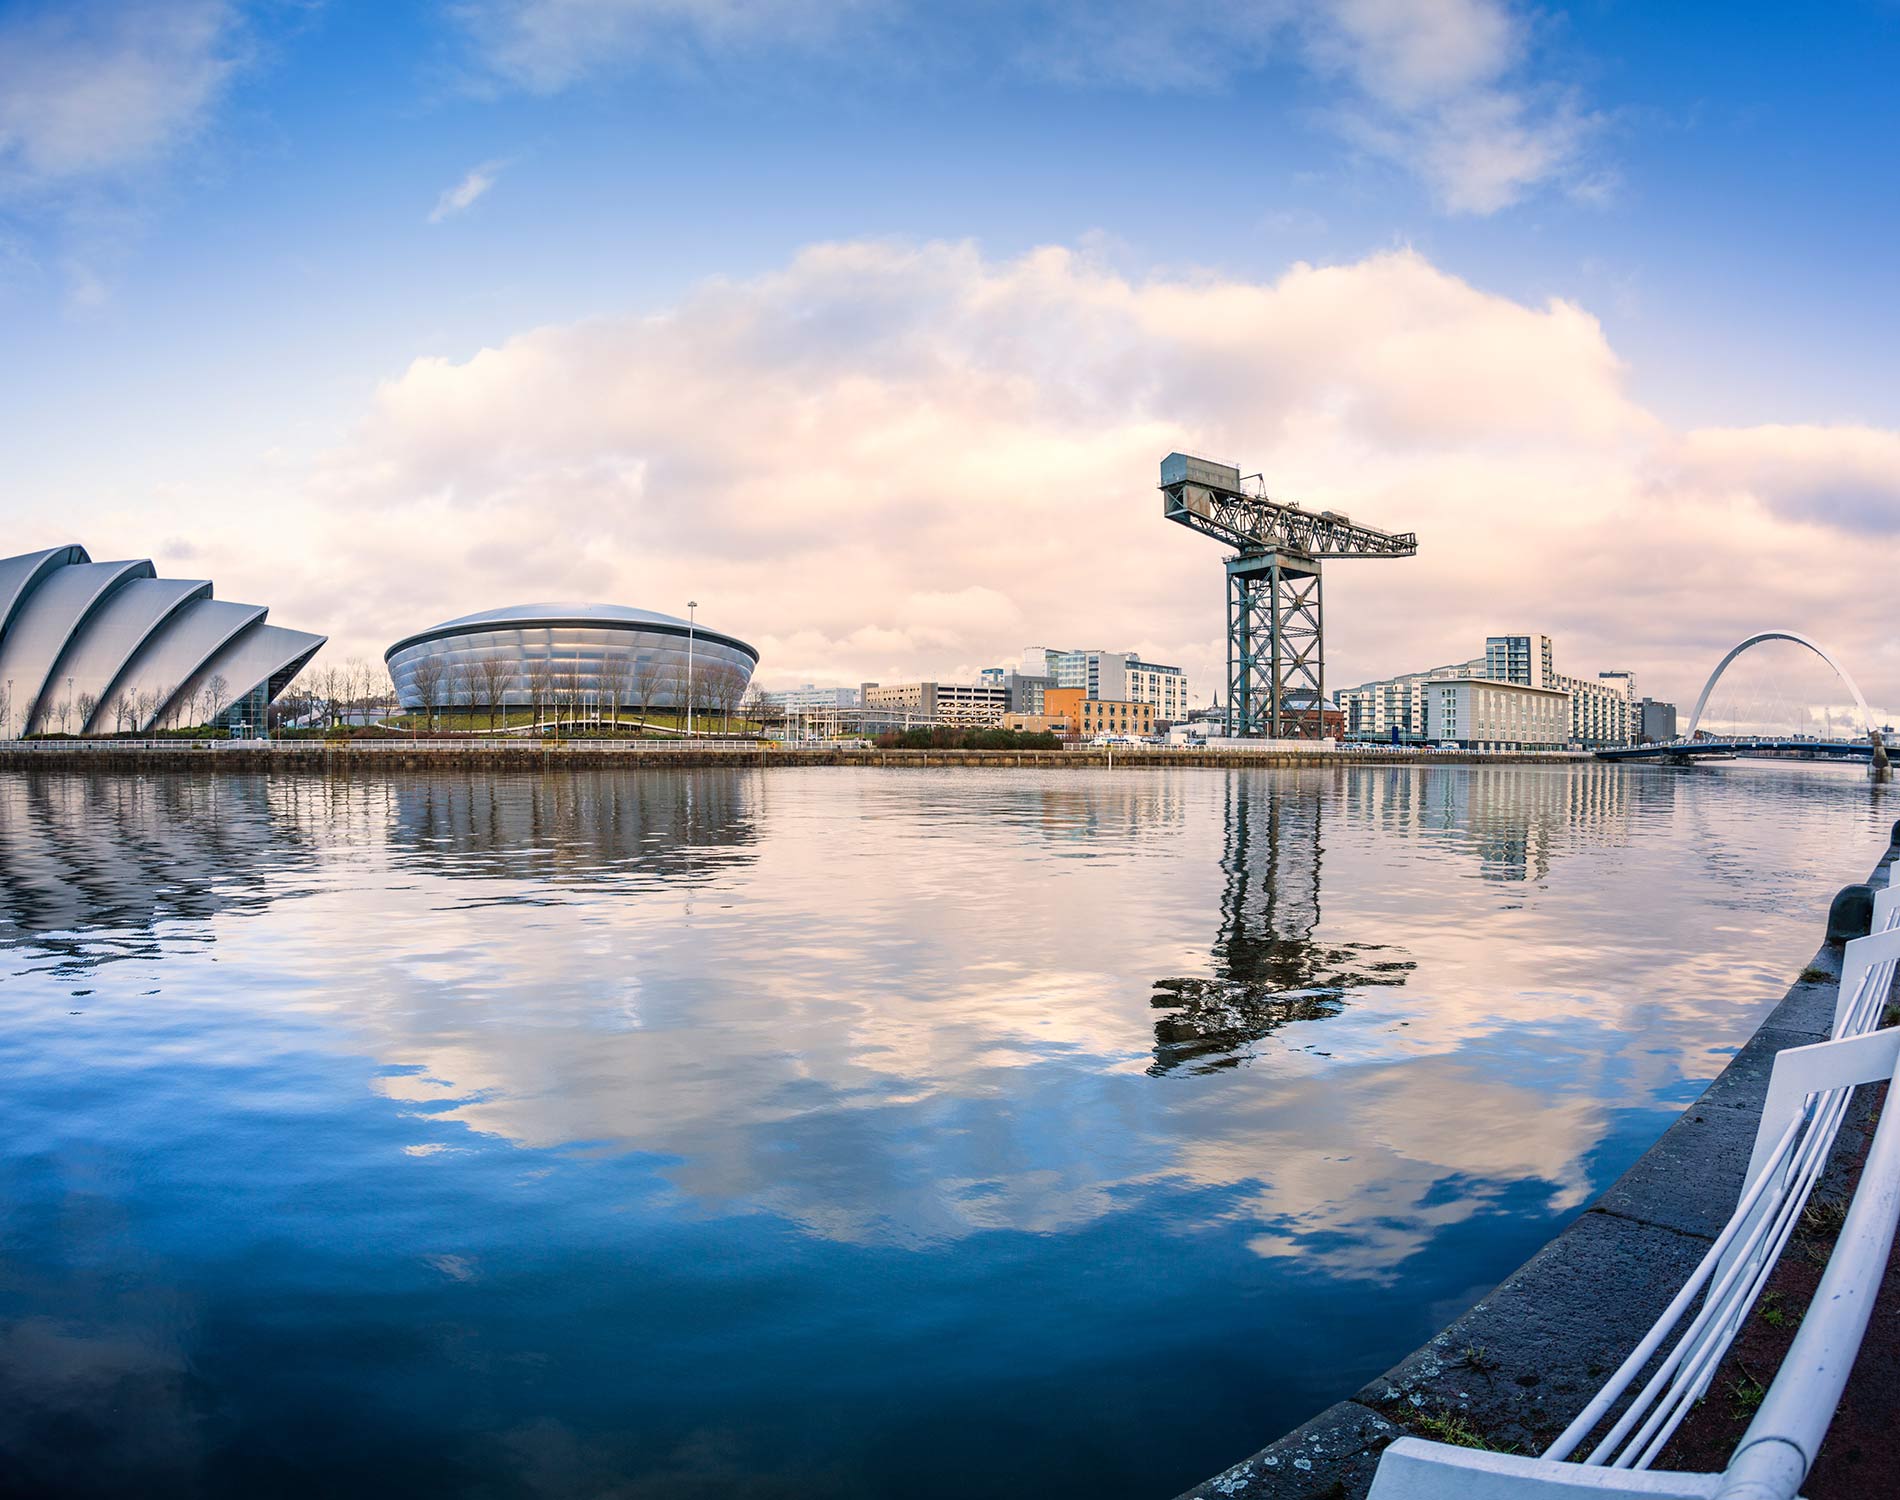 /-/media/images/website/background-images/offices/glasgow/glasgow-the-river-clyde.ashx?sc_lang=zh-cn